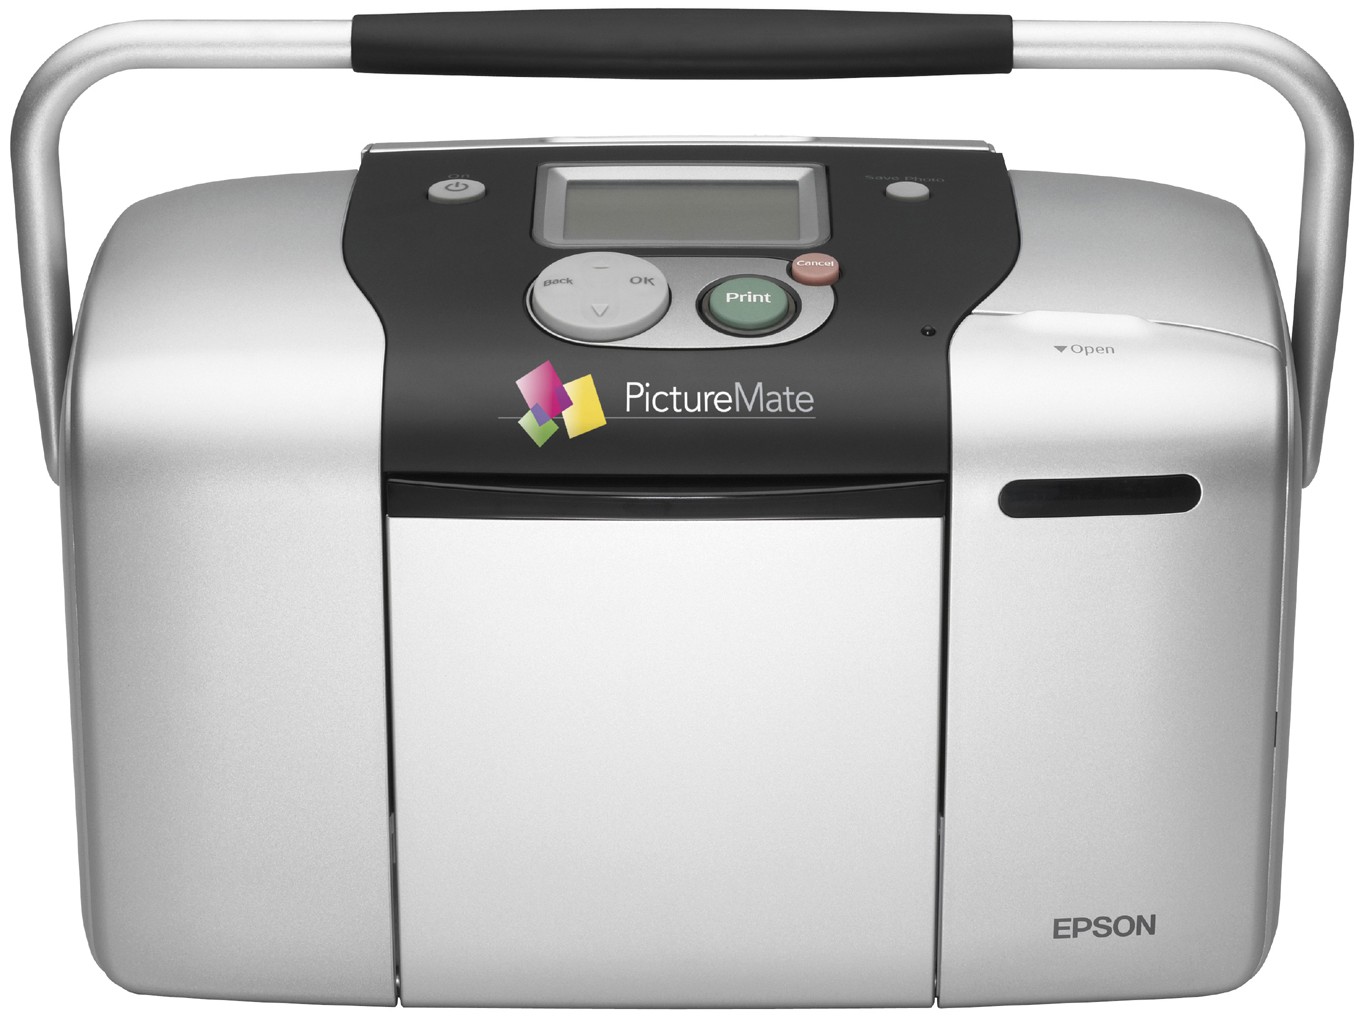 Epson Picturemate Mint - Featured